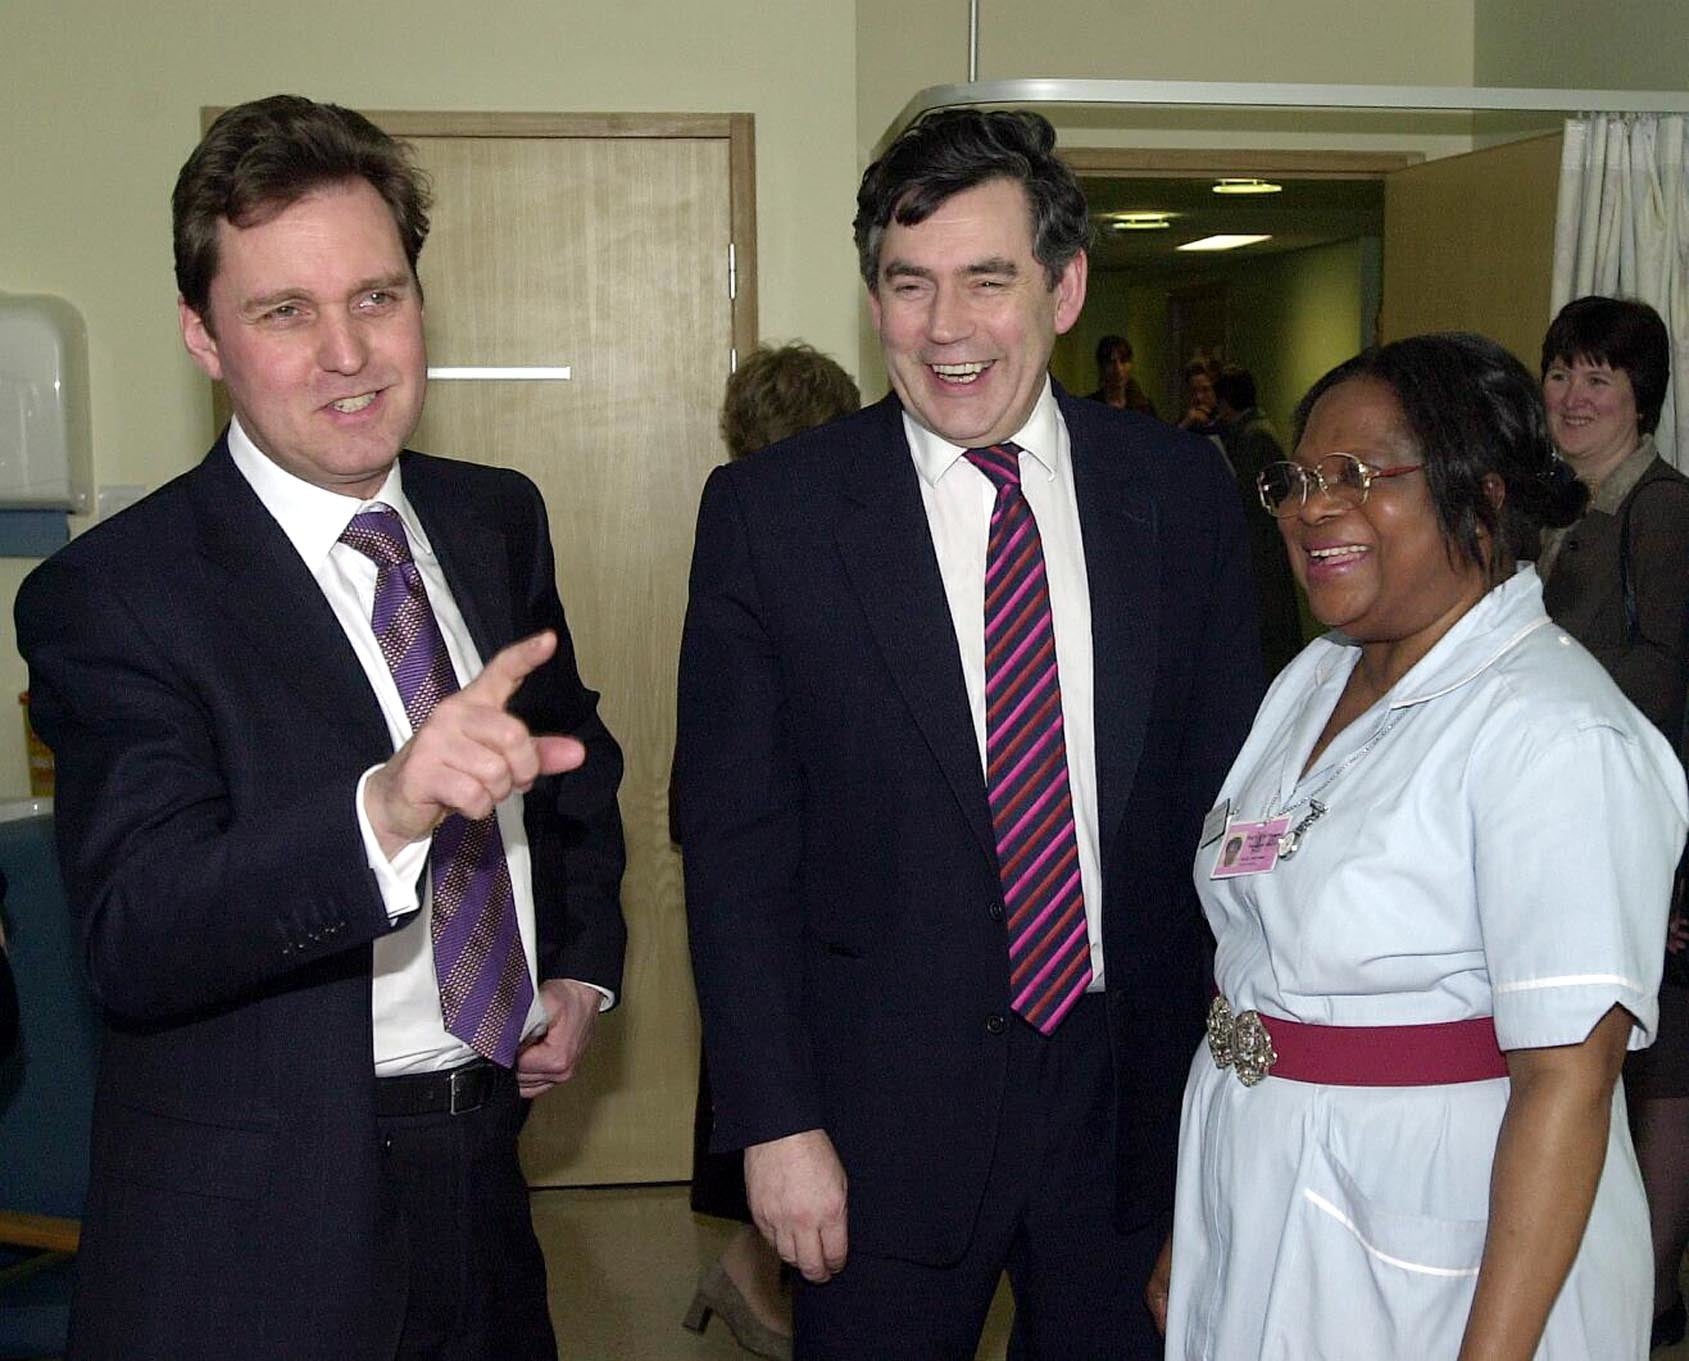 Gordon Brown and Milburn talk to staff nurse Kelme Onyeomah during a visit to the new gynaecology unit at St Thomas’ Hospital in London, 2002